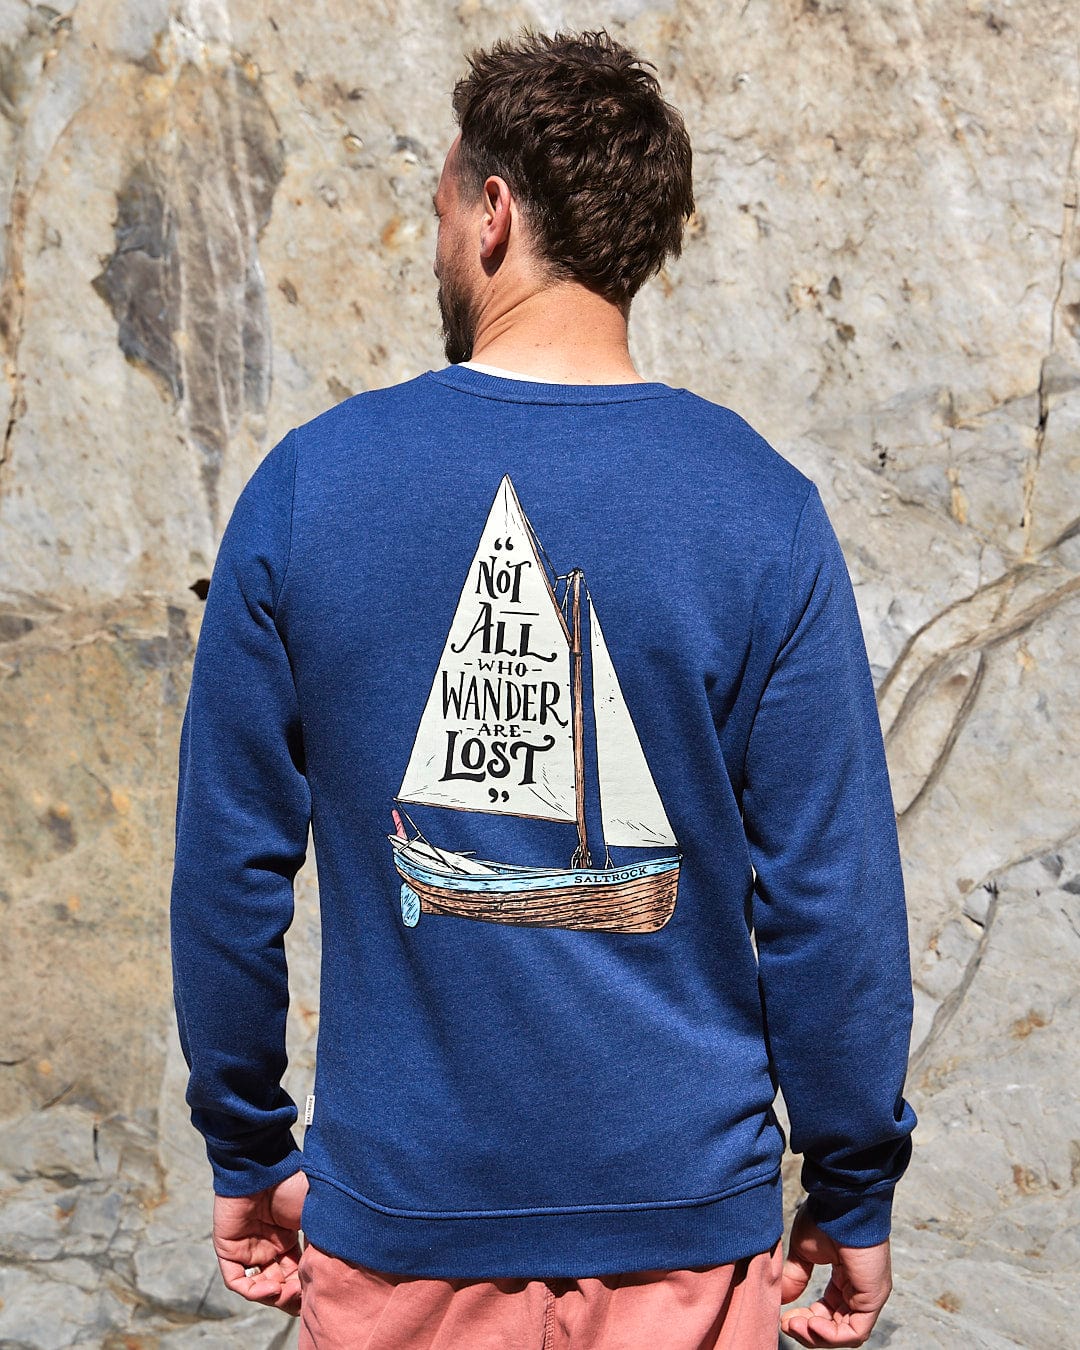 A man wearing a Saltrock sweatshirt with the Lost Ships - Mens Crew Sweat - Dark Blue design, featuring a sailboat on it.